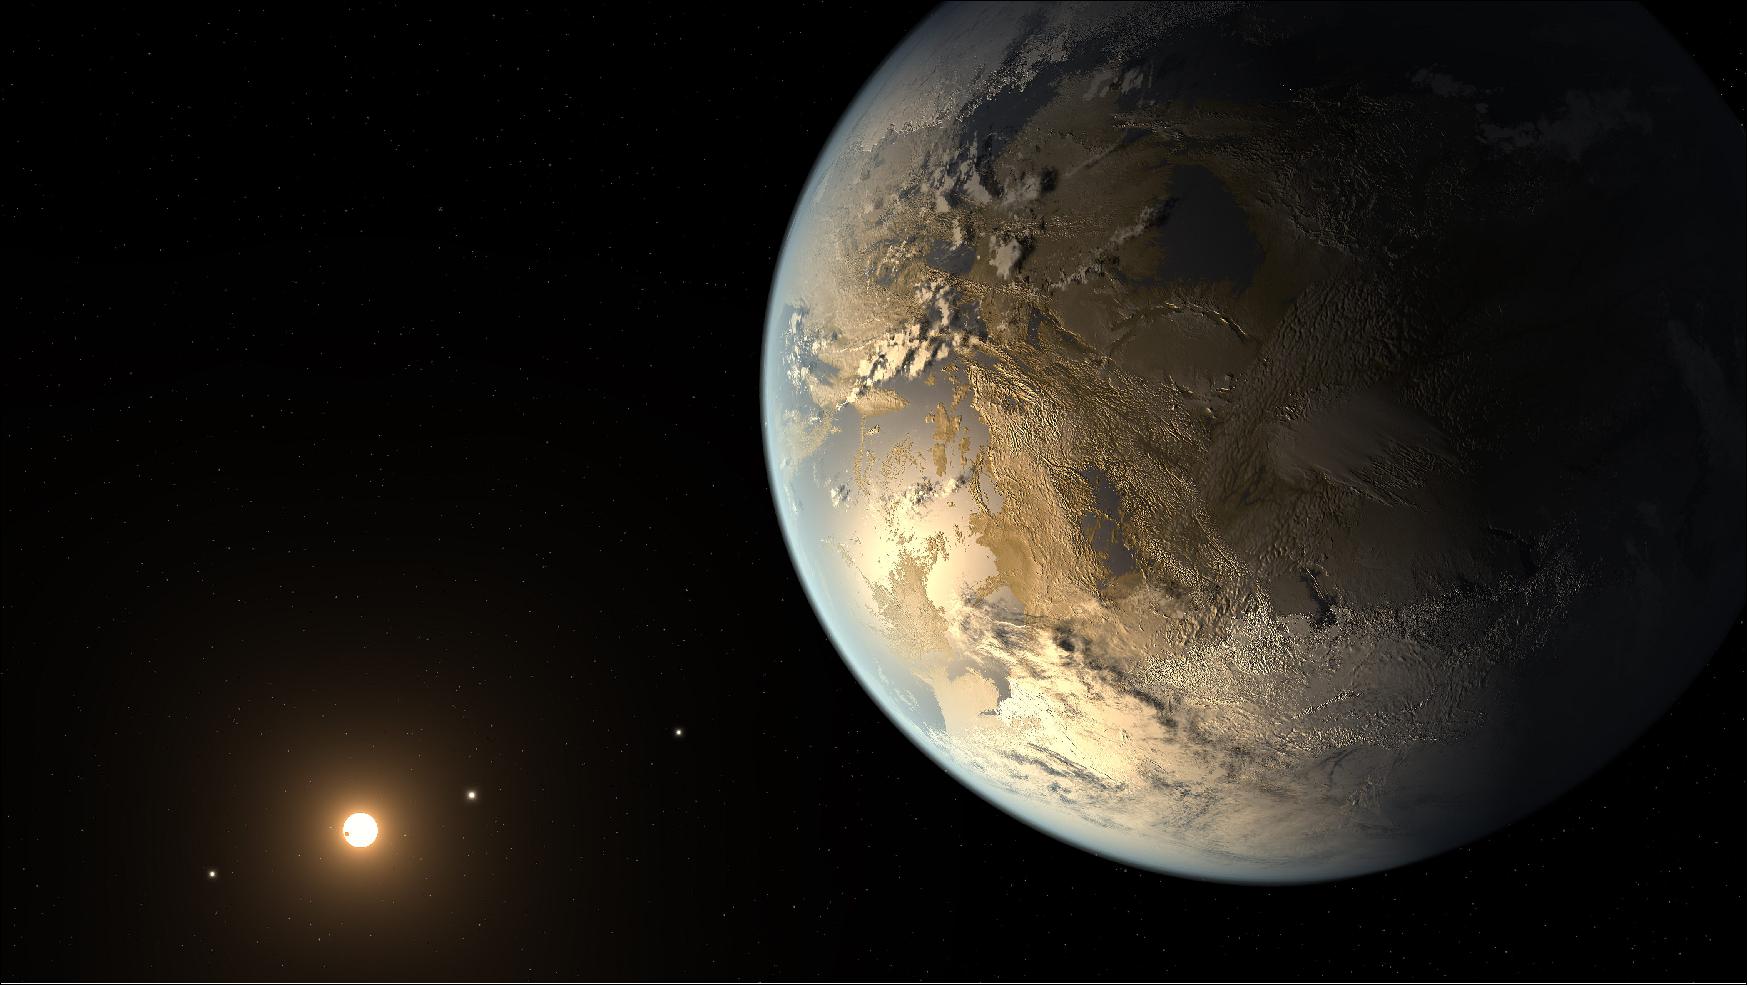 Figure 18: This illustration depicts Kepler-186f, the first validated Earth-size planet to orbit a distant star in the habitable zone (image credit: NASA Ames/JPL-Caltech/T. Pyle)